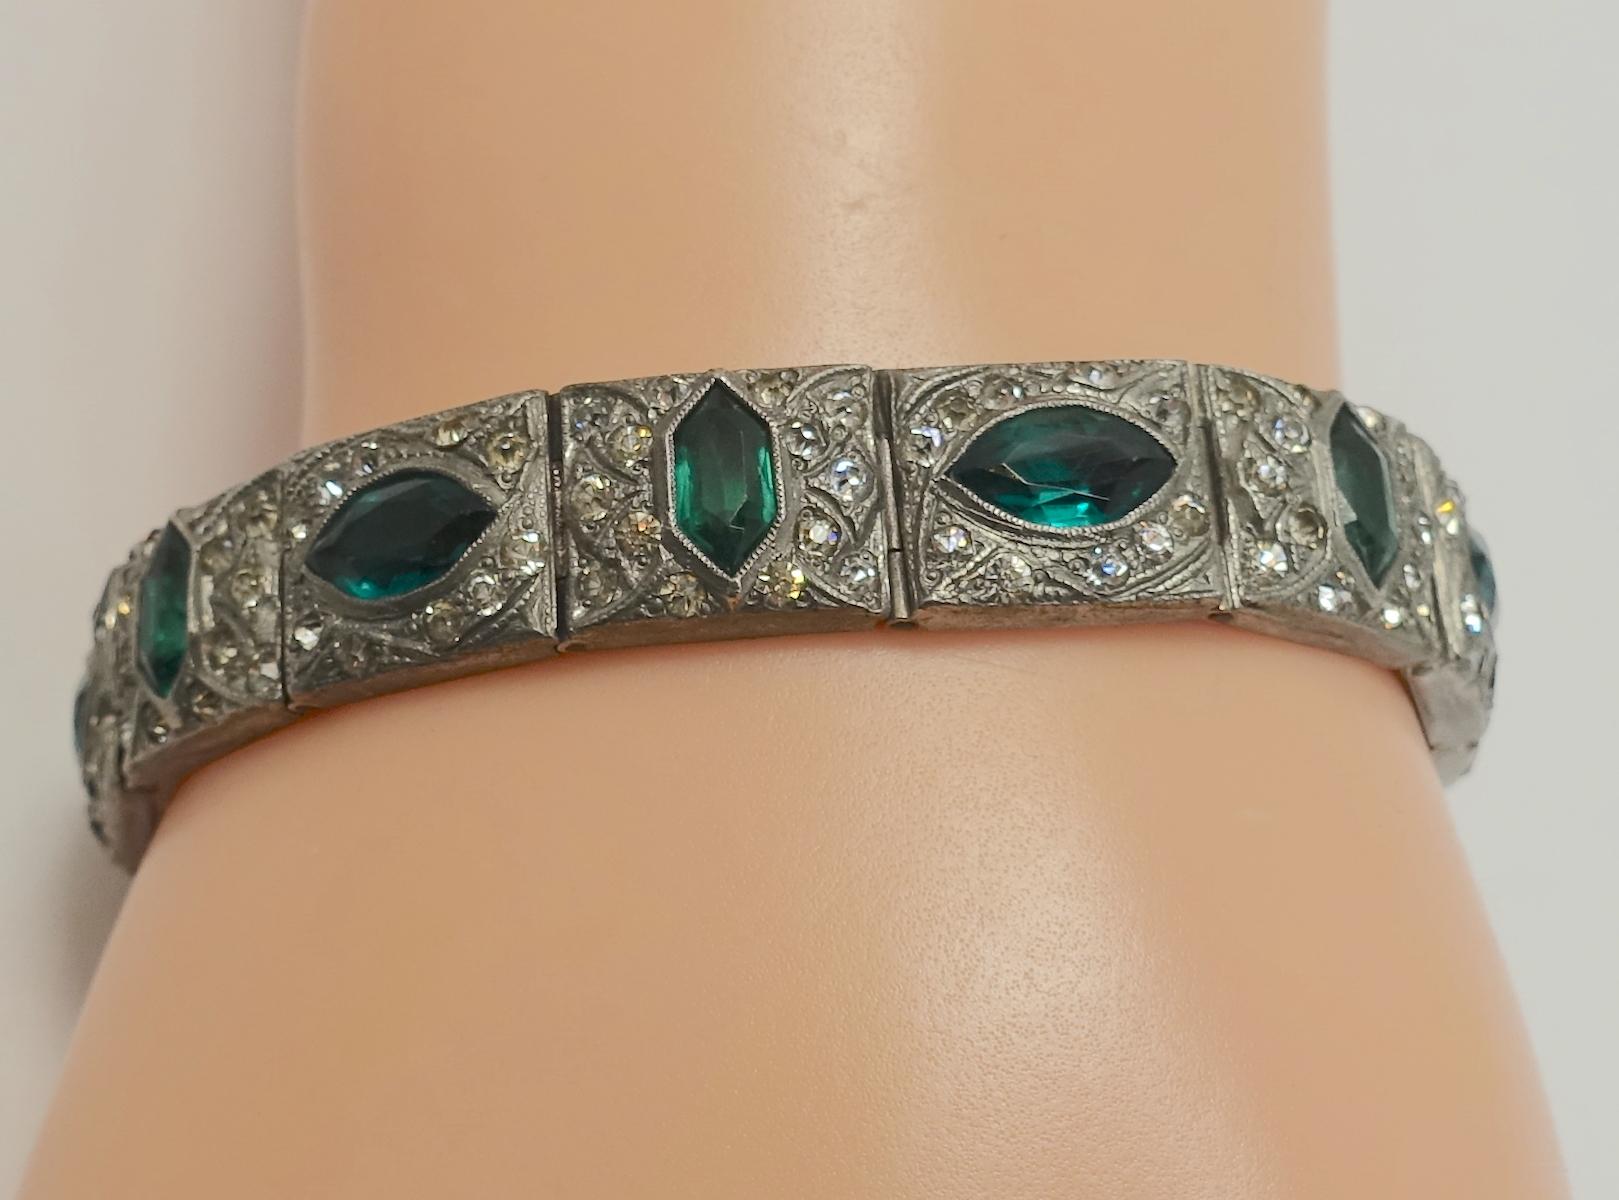 This vintage Art Deco 1920s bracelet features green and clear crystals in a rhodium silver tone setting.  In excellent condition, this bracelet measures 7” x 7/16” with a slide in clasp.